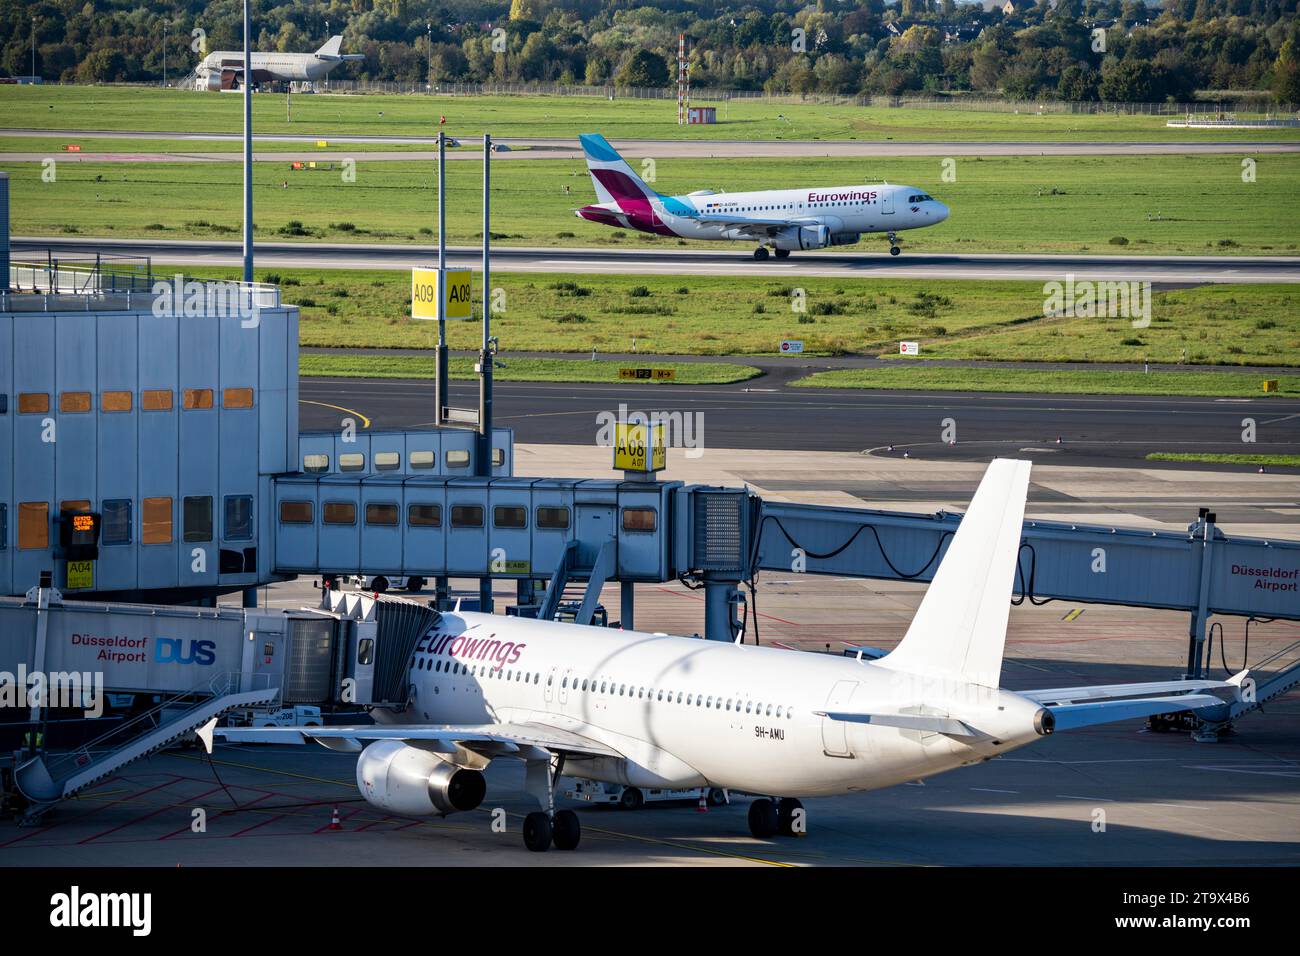 Düsseldorf Airport, Eurowings aircraft at Terminal A, on approach, Stock Photo